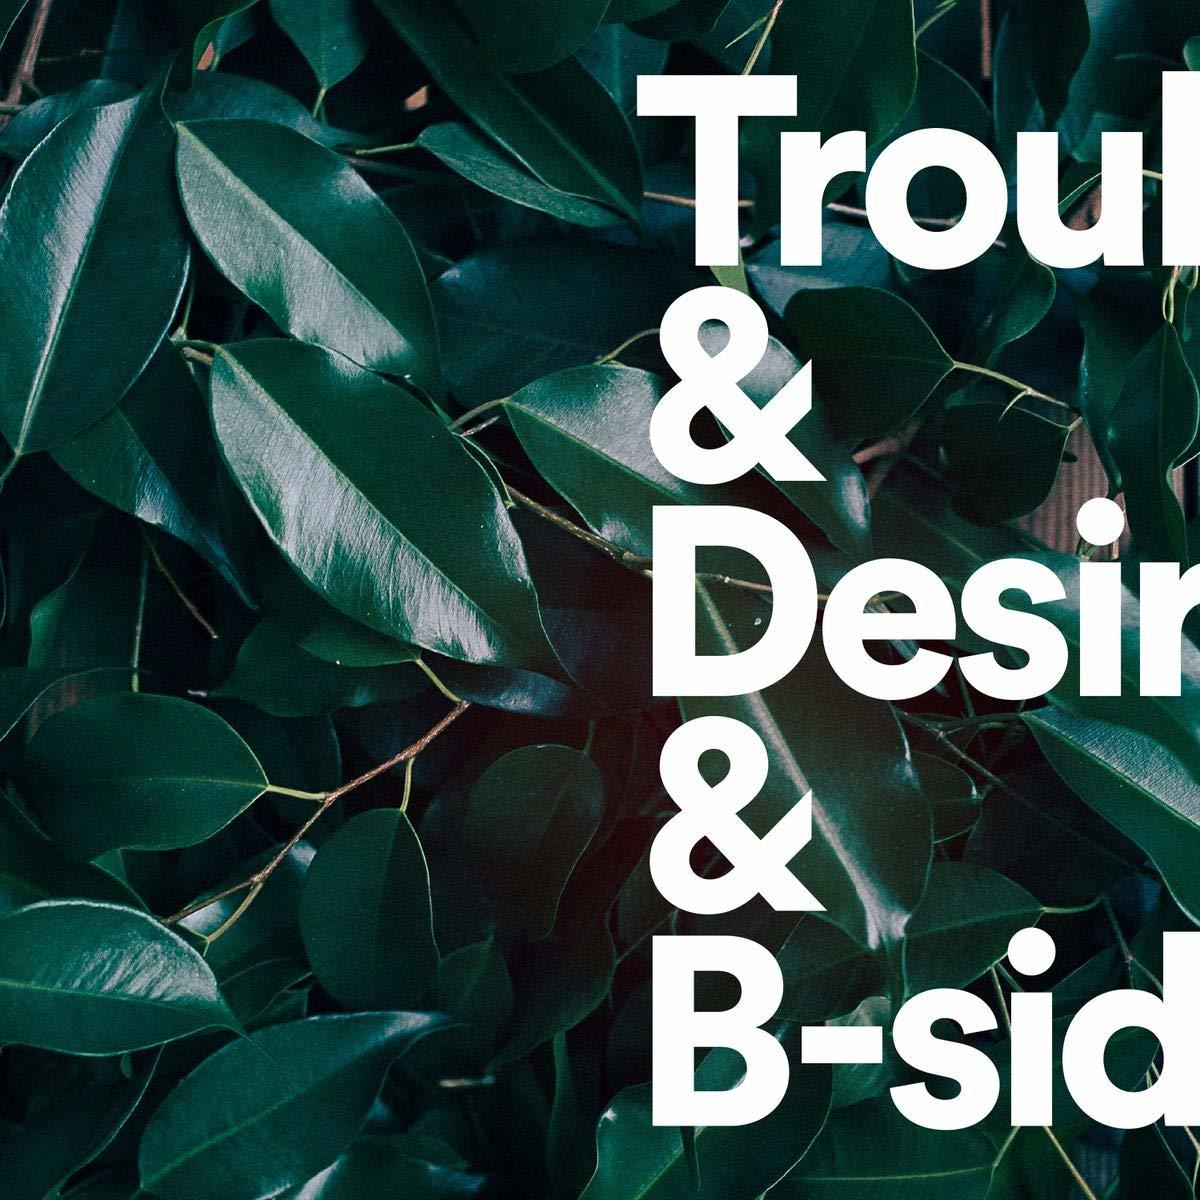 Tiger Lou and - B-sides (Vinyl) & Desire - Trouble